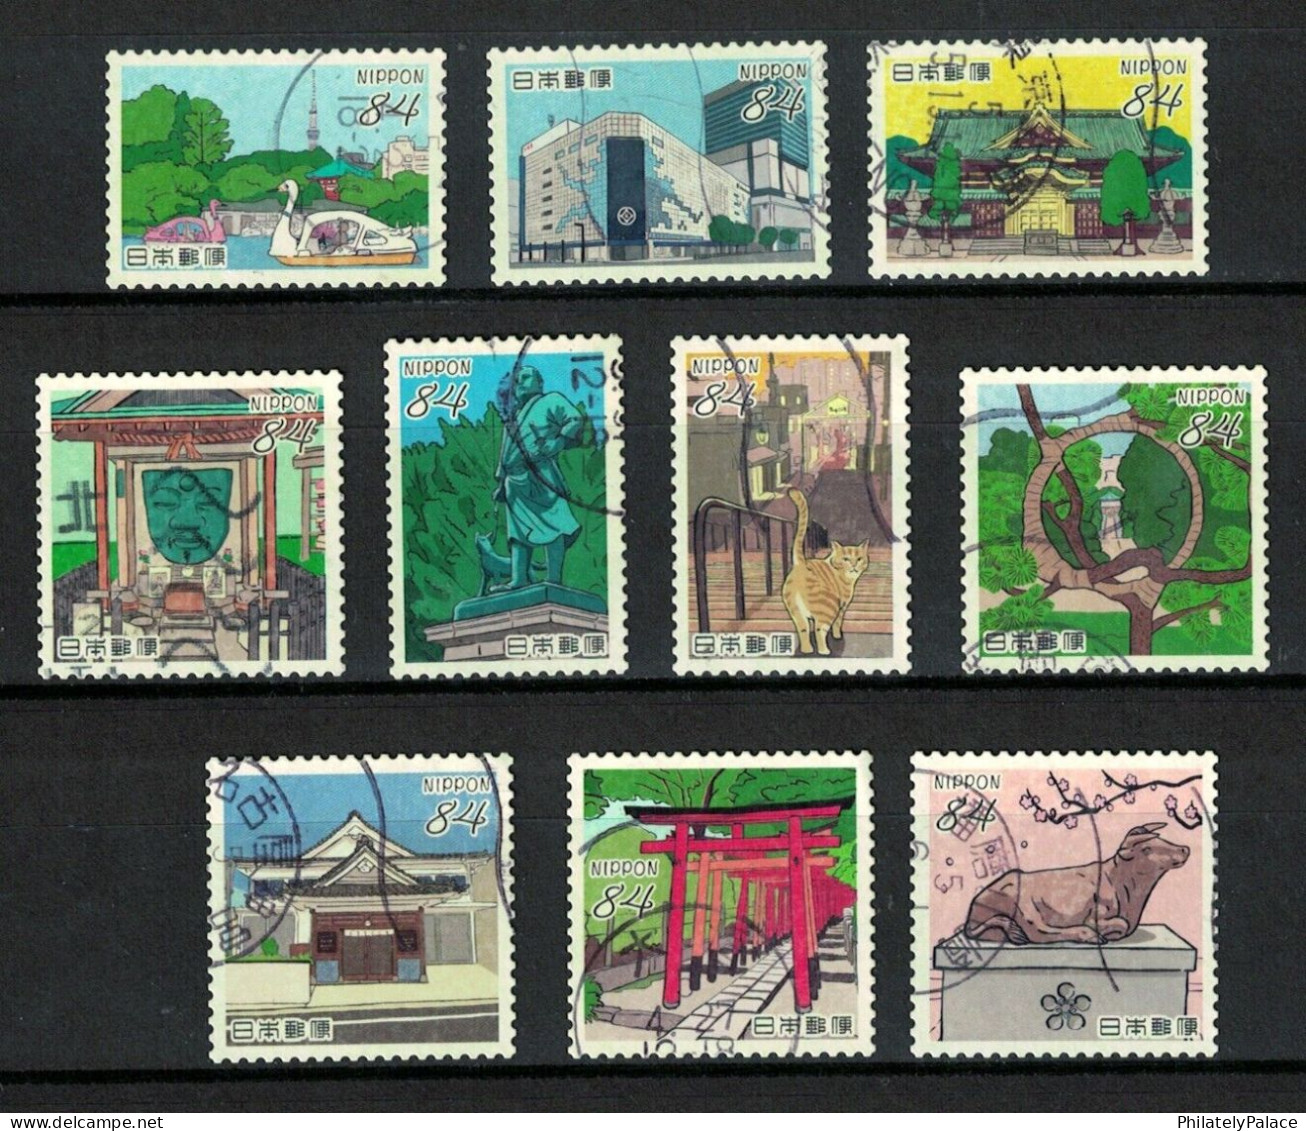 JAPAN 2023 EDO TOKYO SERIES PART III 84 YEN COMP. SET OF 10 ,CAT,TEMPLE,OX,DUCK,MASK,ARCHITECTURE,USED (**) - Used Stamps